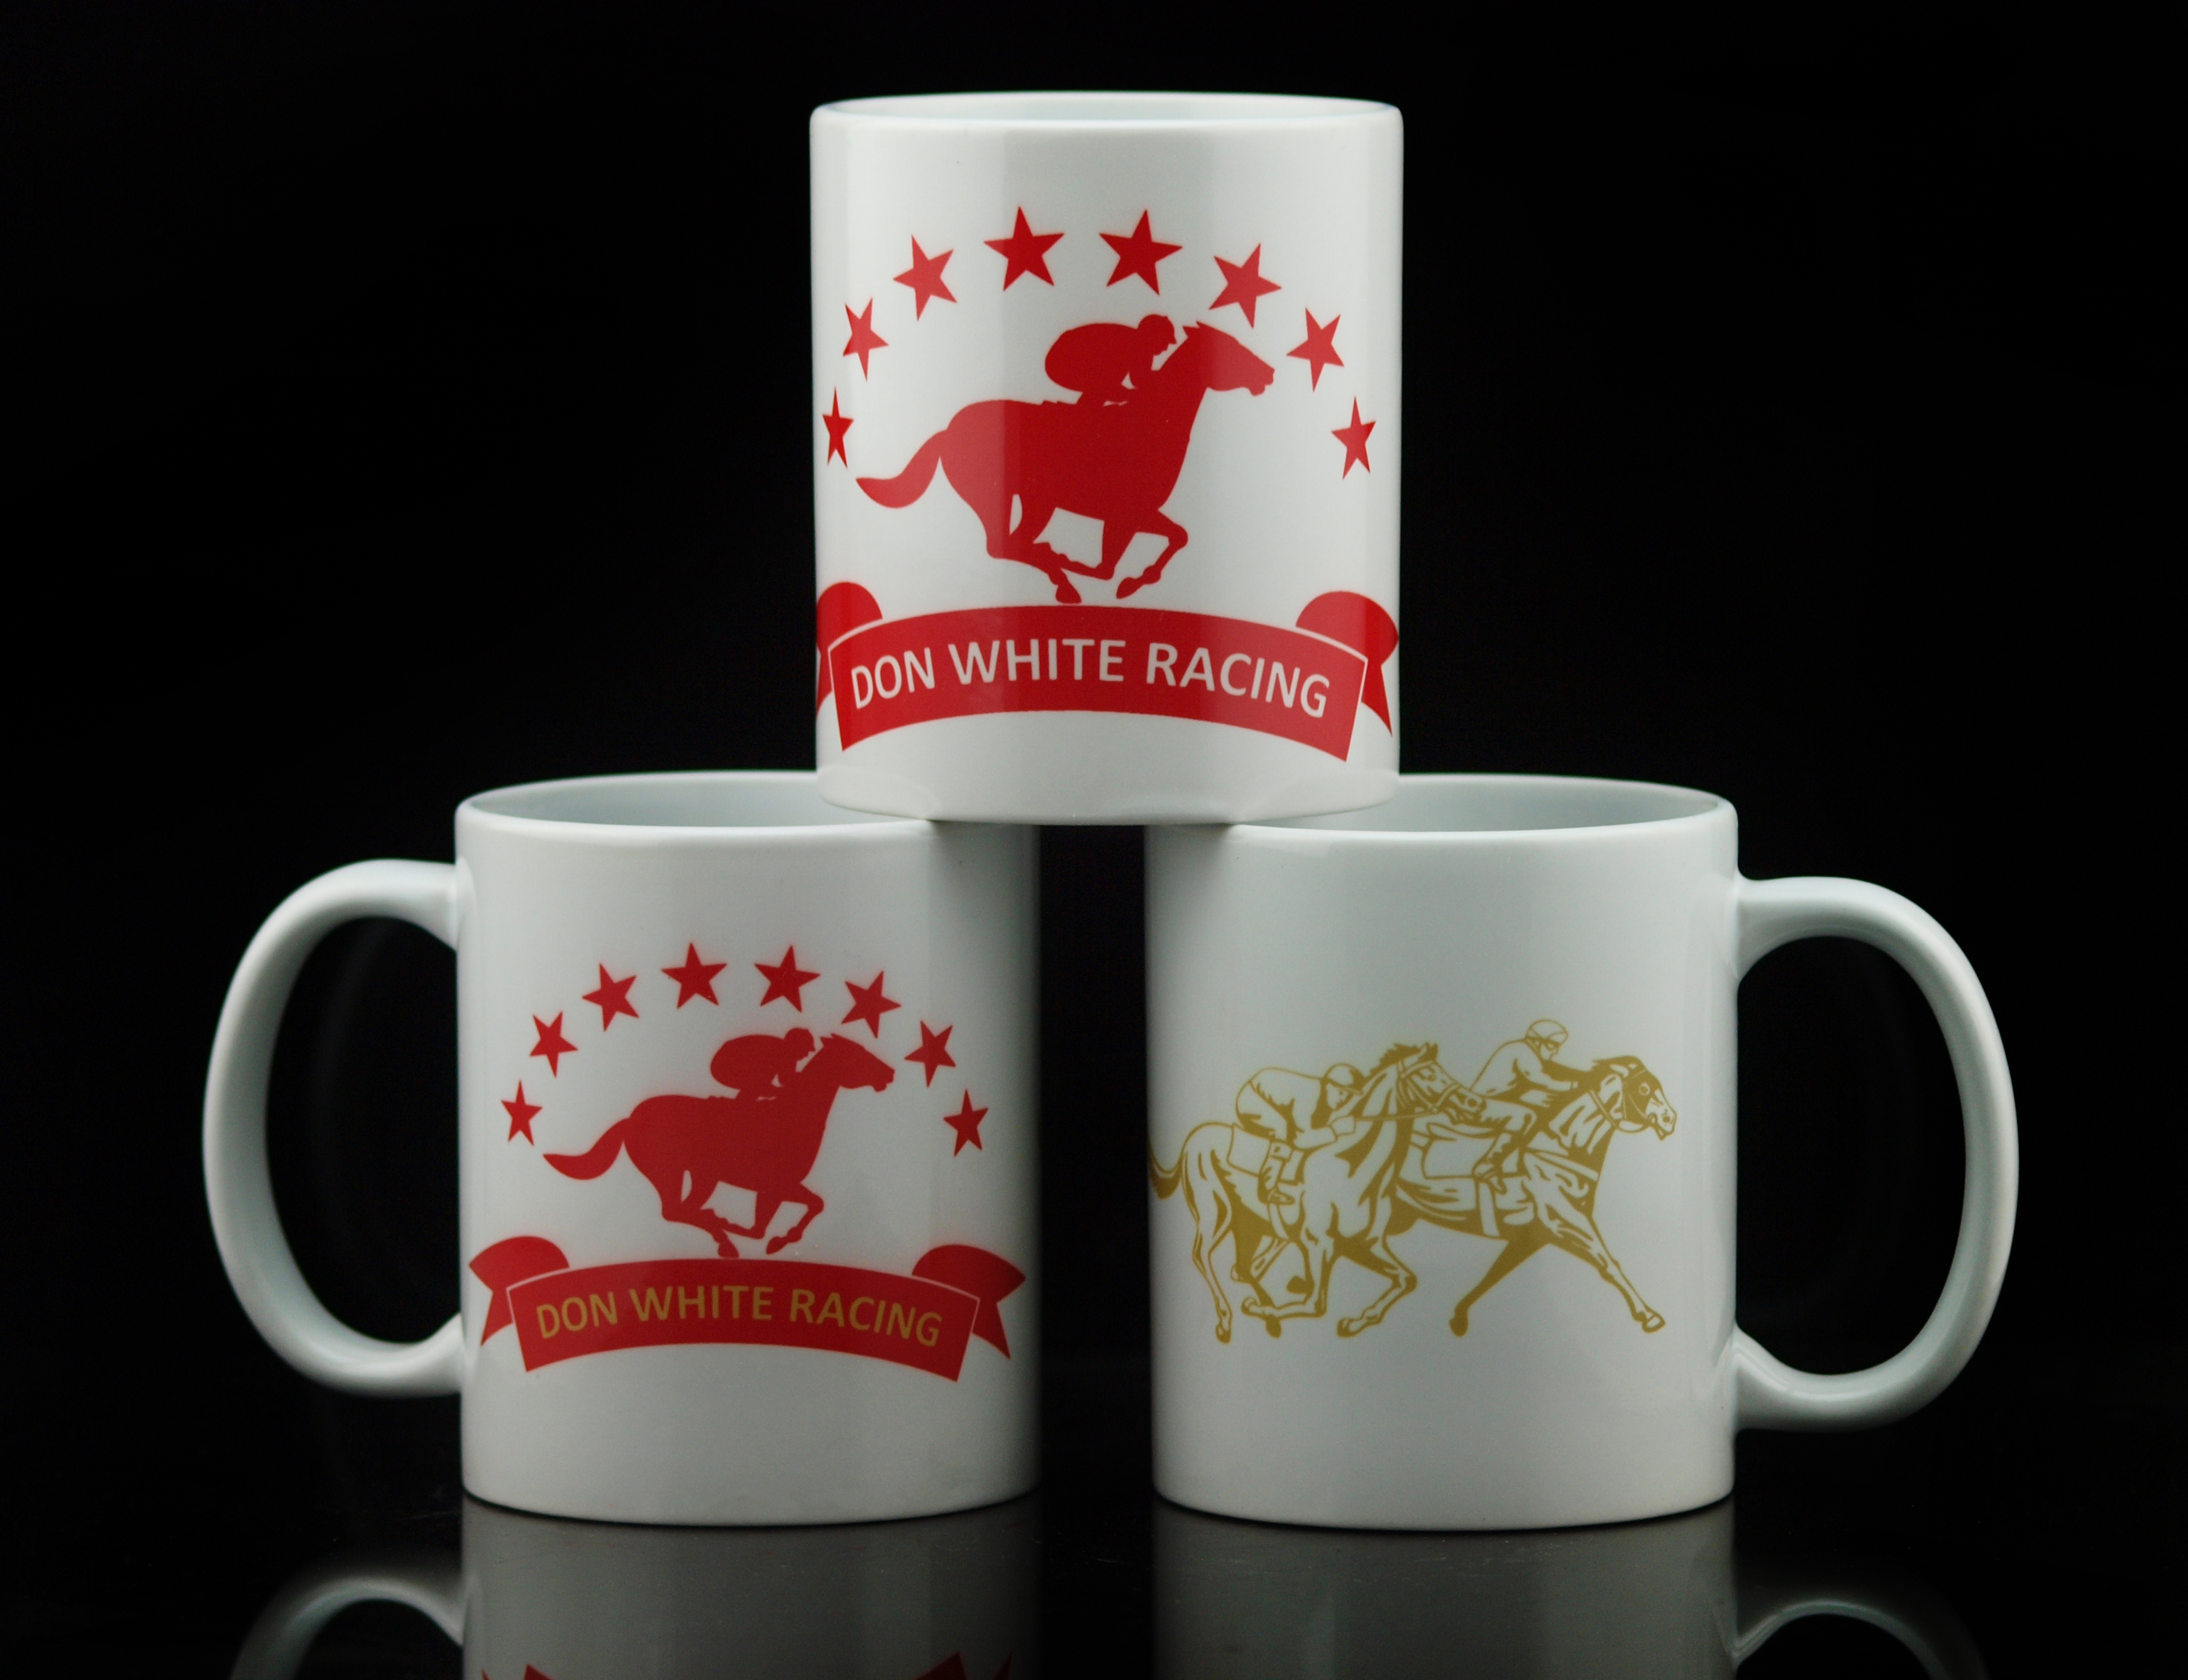 Business Mugs made with sublimation printing